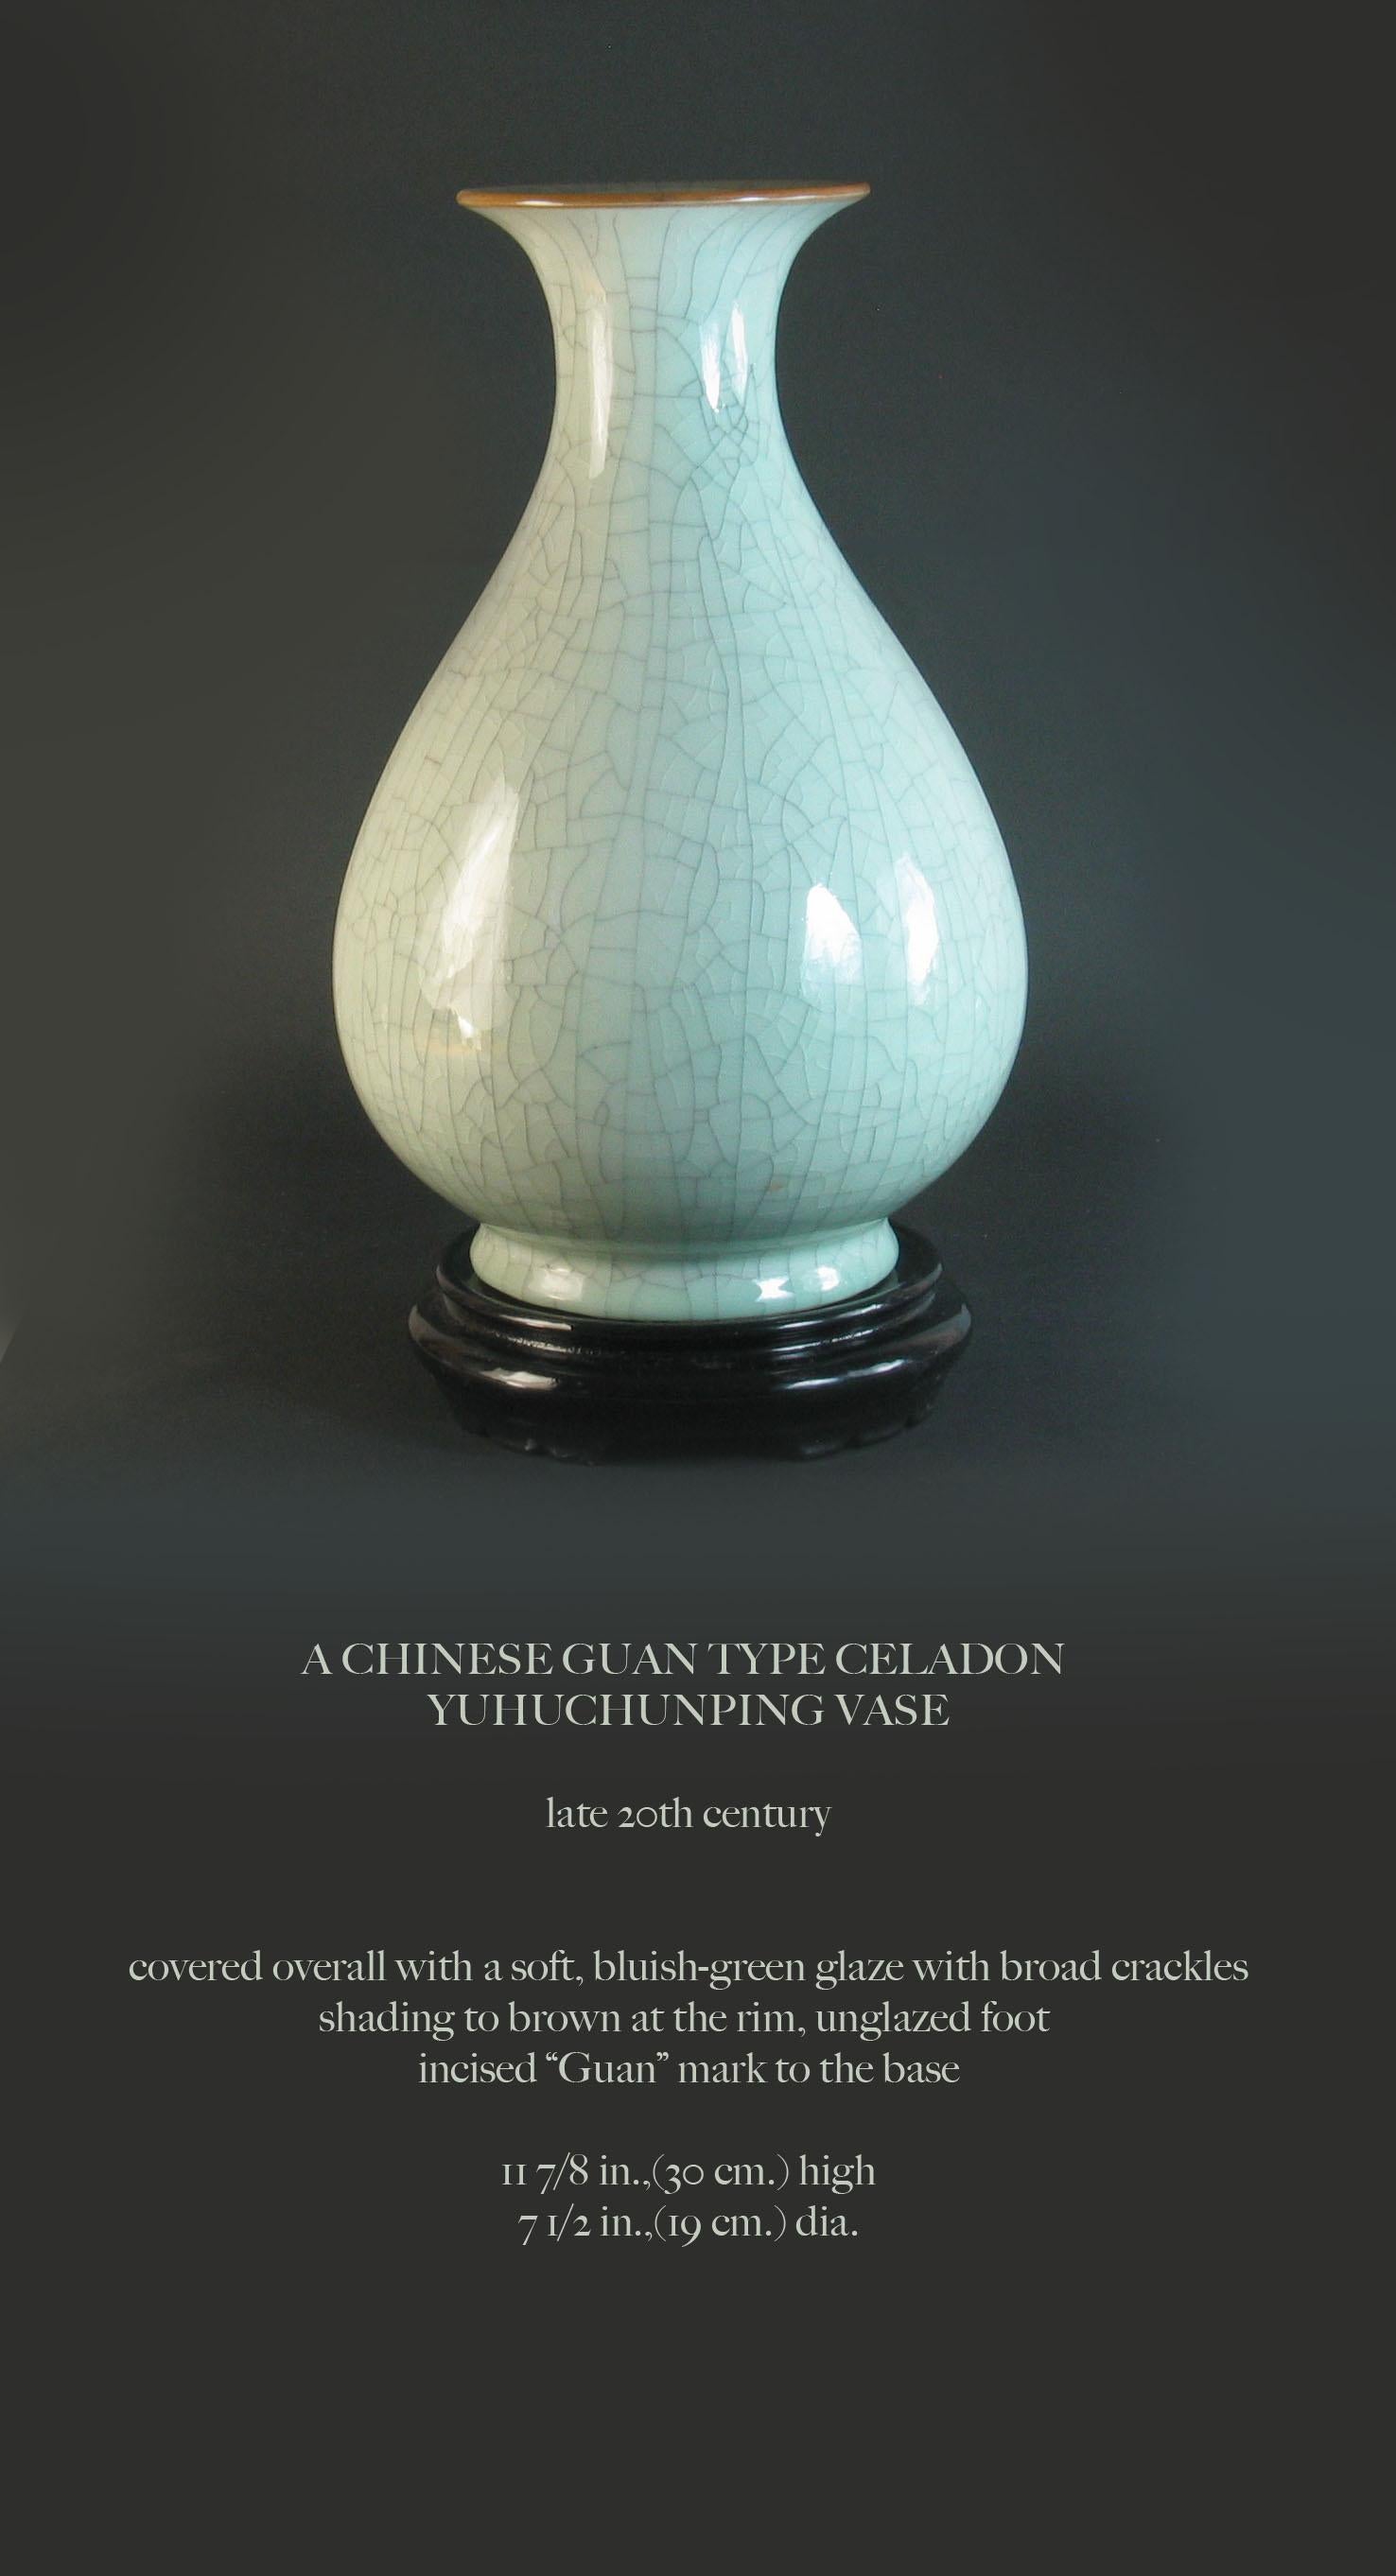 A Chinese guan type celadon
Yuhuchunping vase,

Late 20th century.


Covered overall with a soft, bluish-green glaze with broad crackles,
shading to brown at the rim, unglazed foot 
incised “Guan” mark to the base.

Measures: 11 7/8